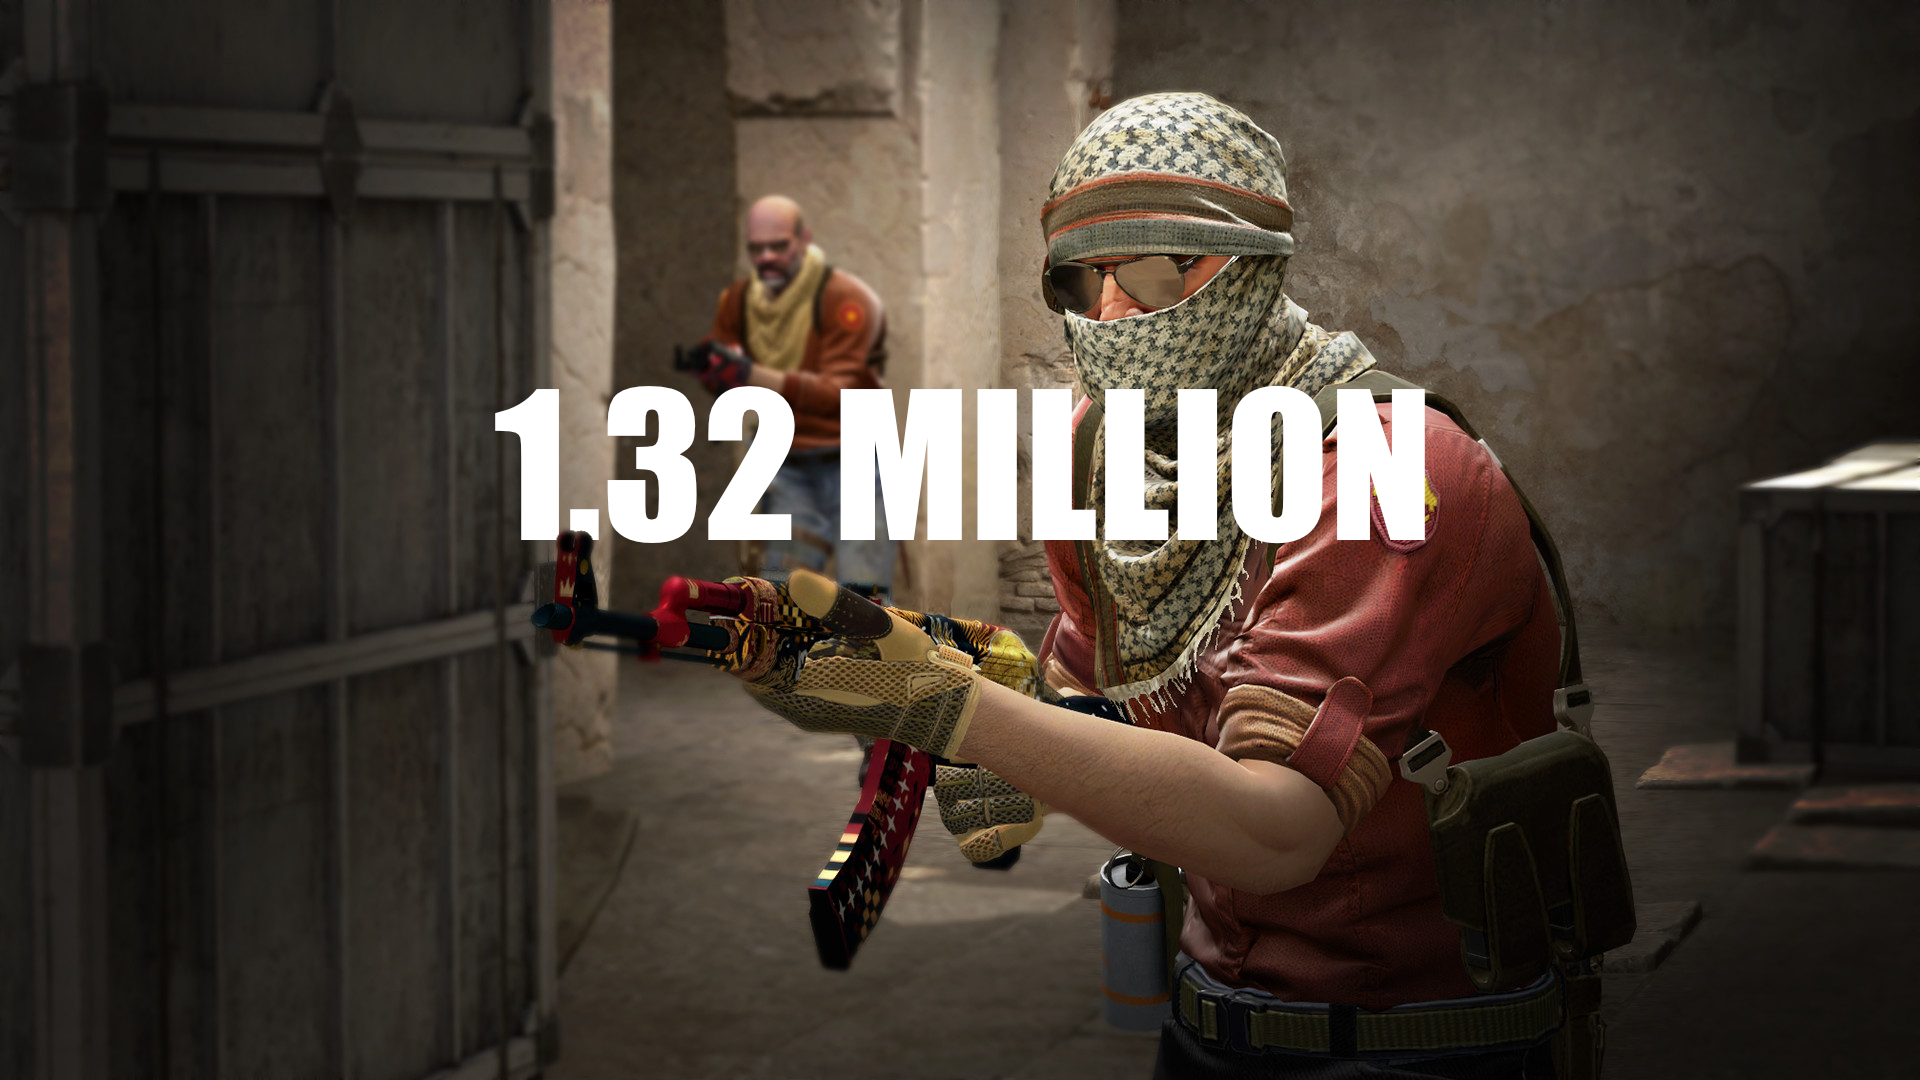 hits new all-time with 1.32 million concurrent players | KitGuru